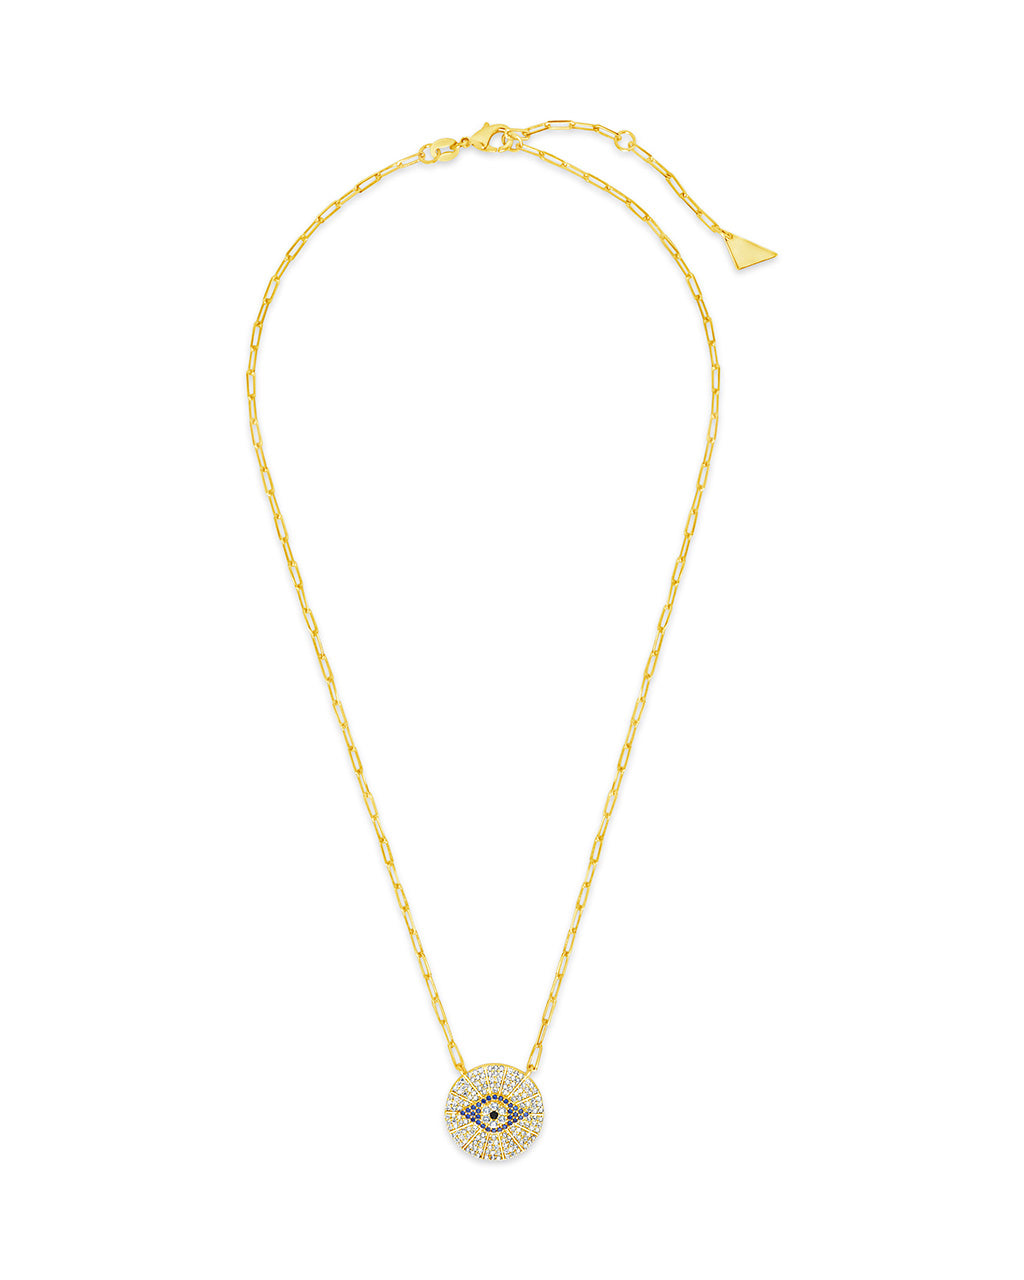 Gold Evil Eye Necklace with Cubic Zirconia